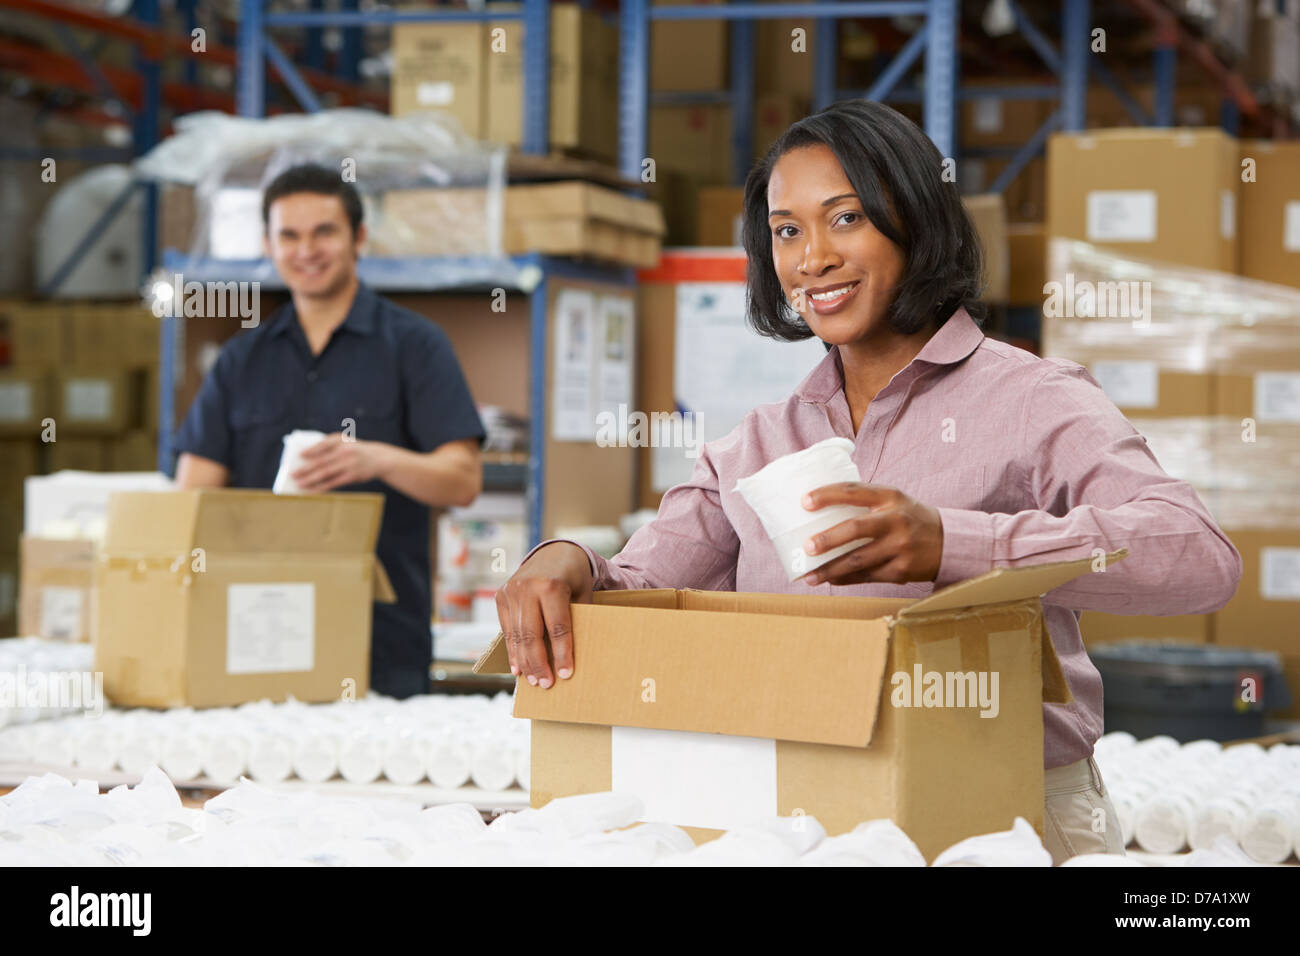 Manager Checking Goods On Production Line Stock Photo